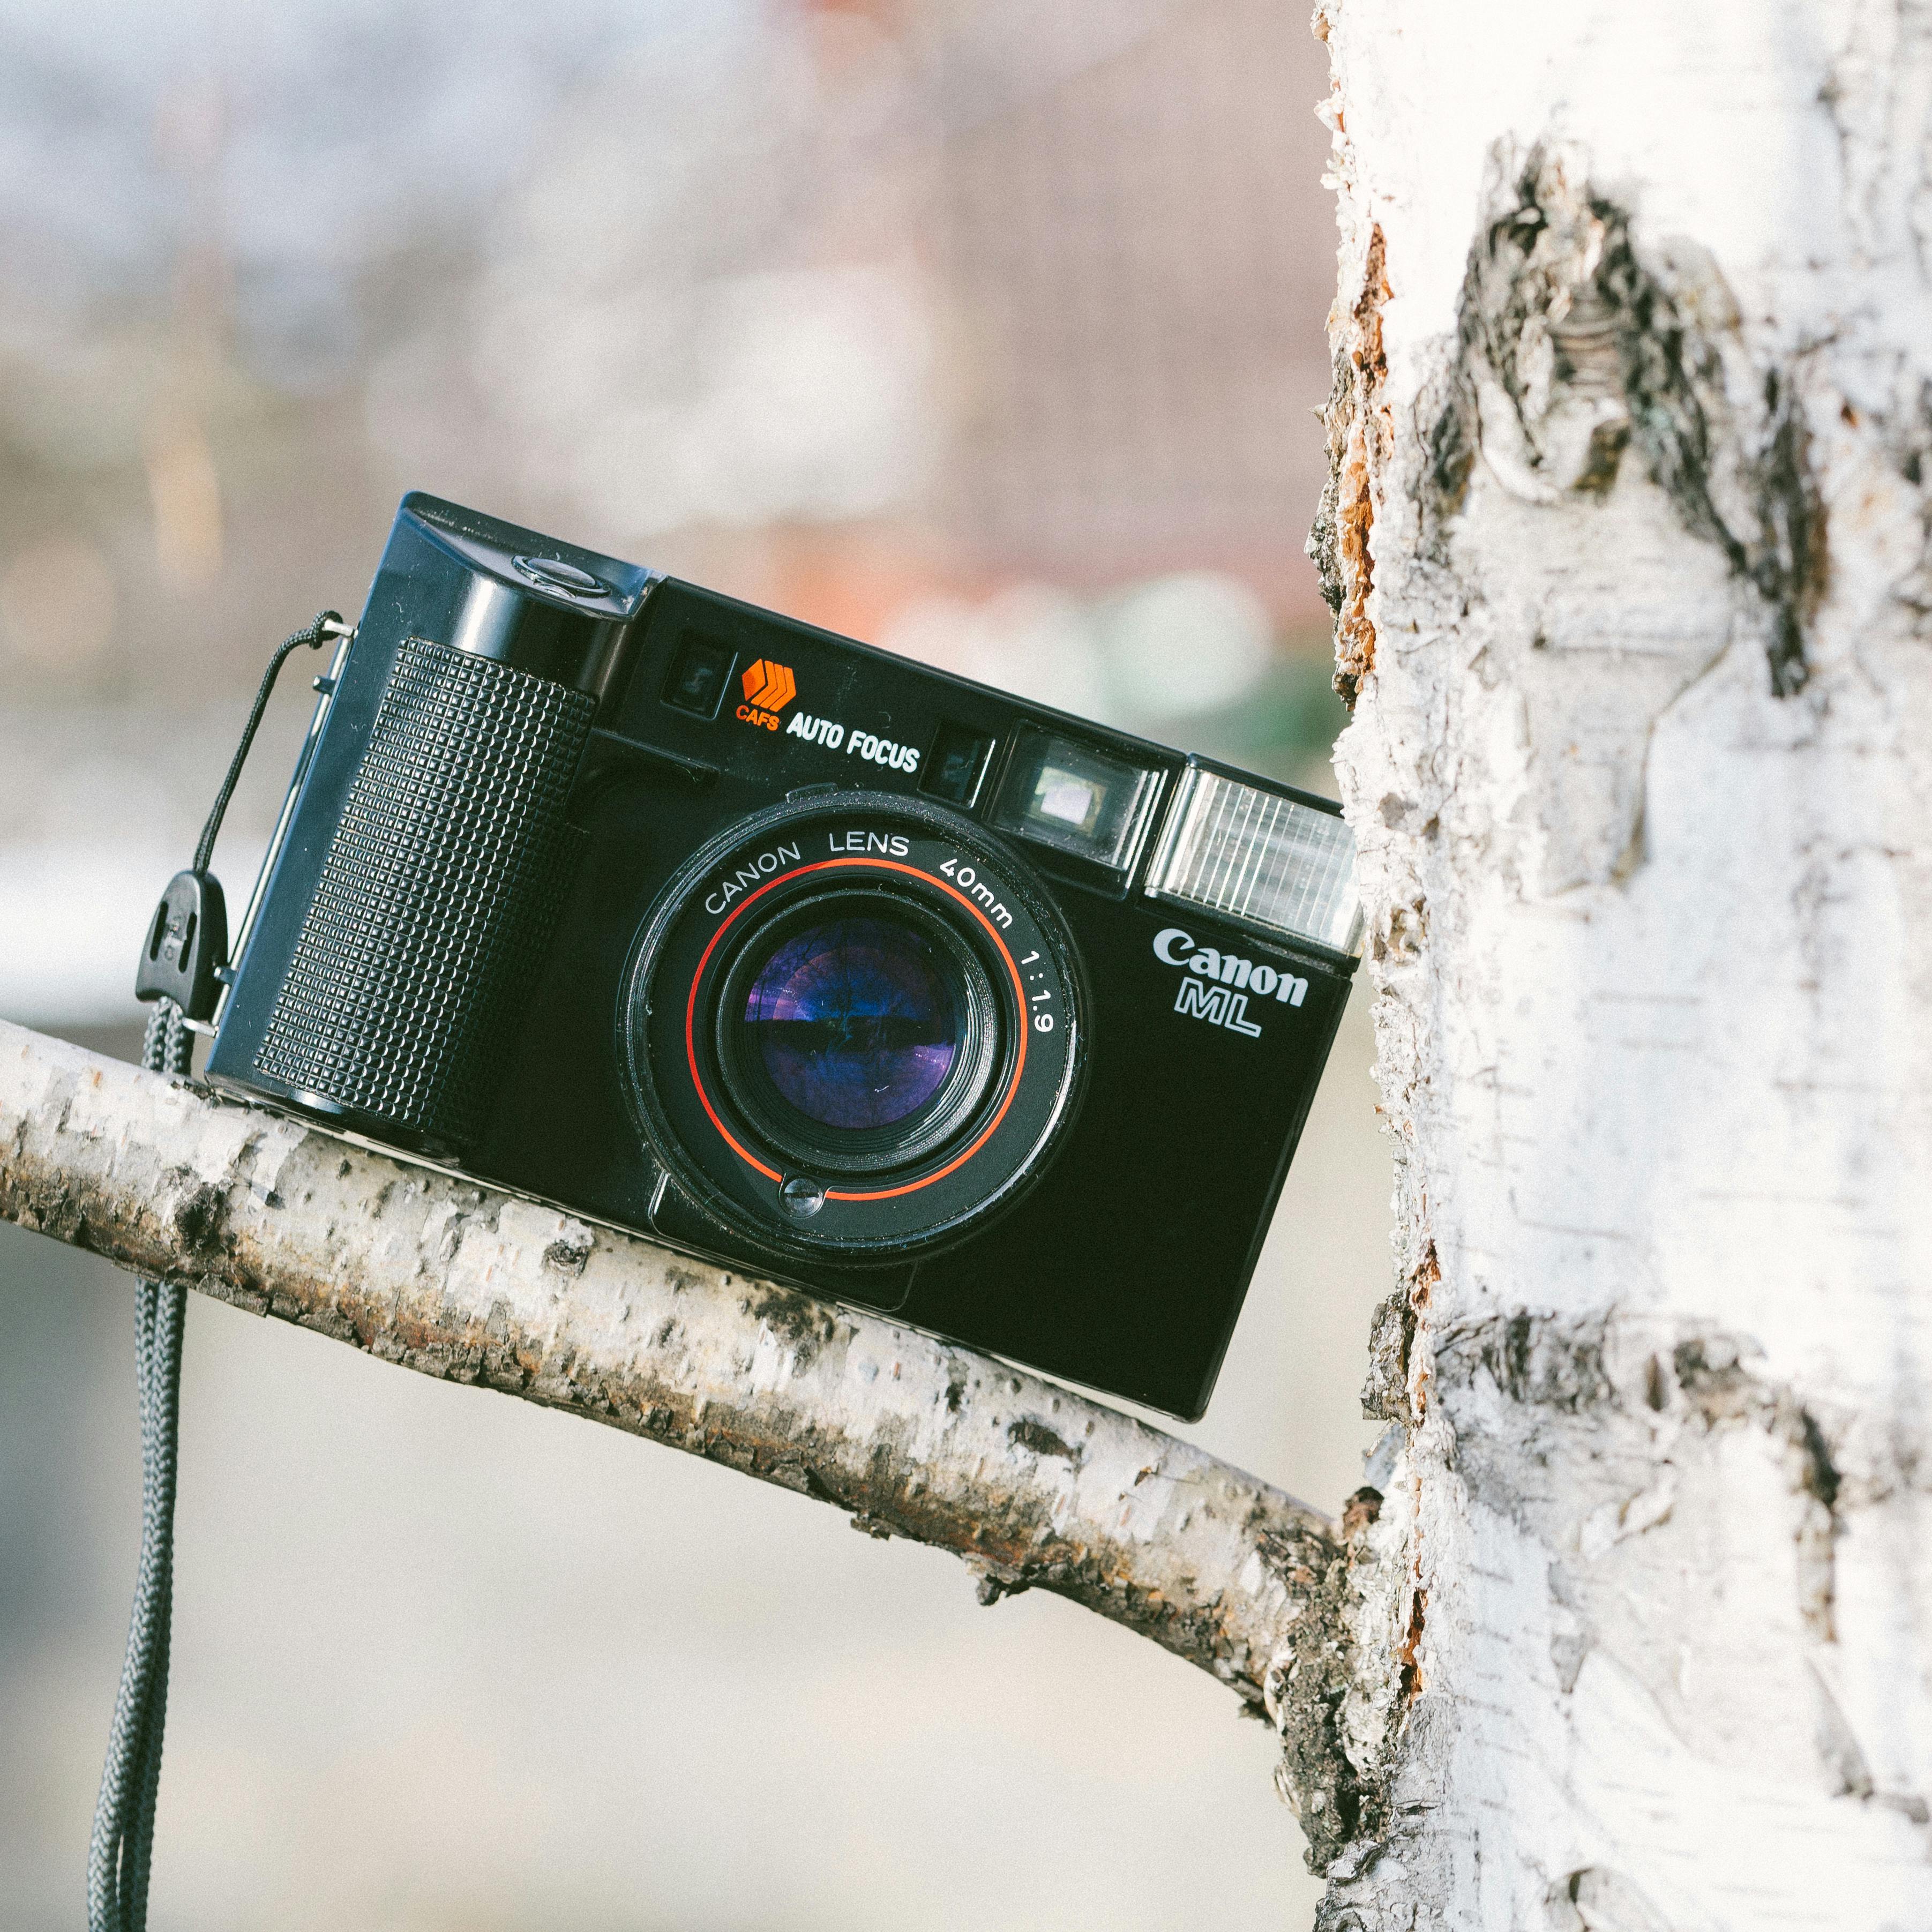 Tech for Travel Photography: Gadgets for Capturing Stunning Images